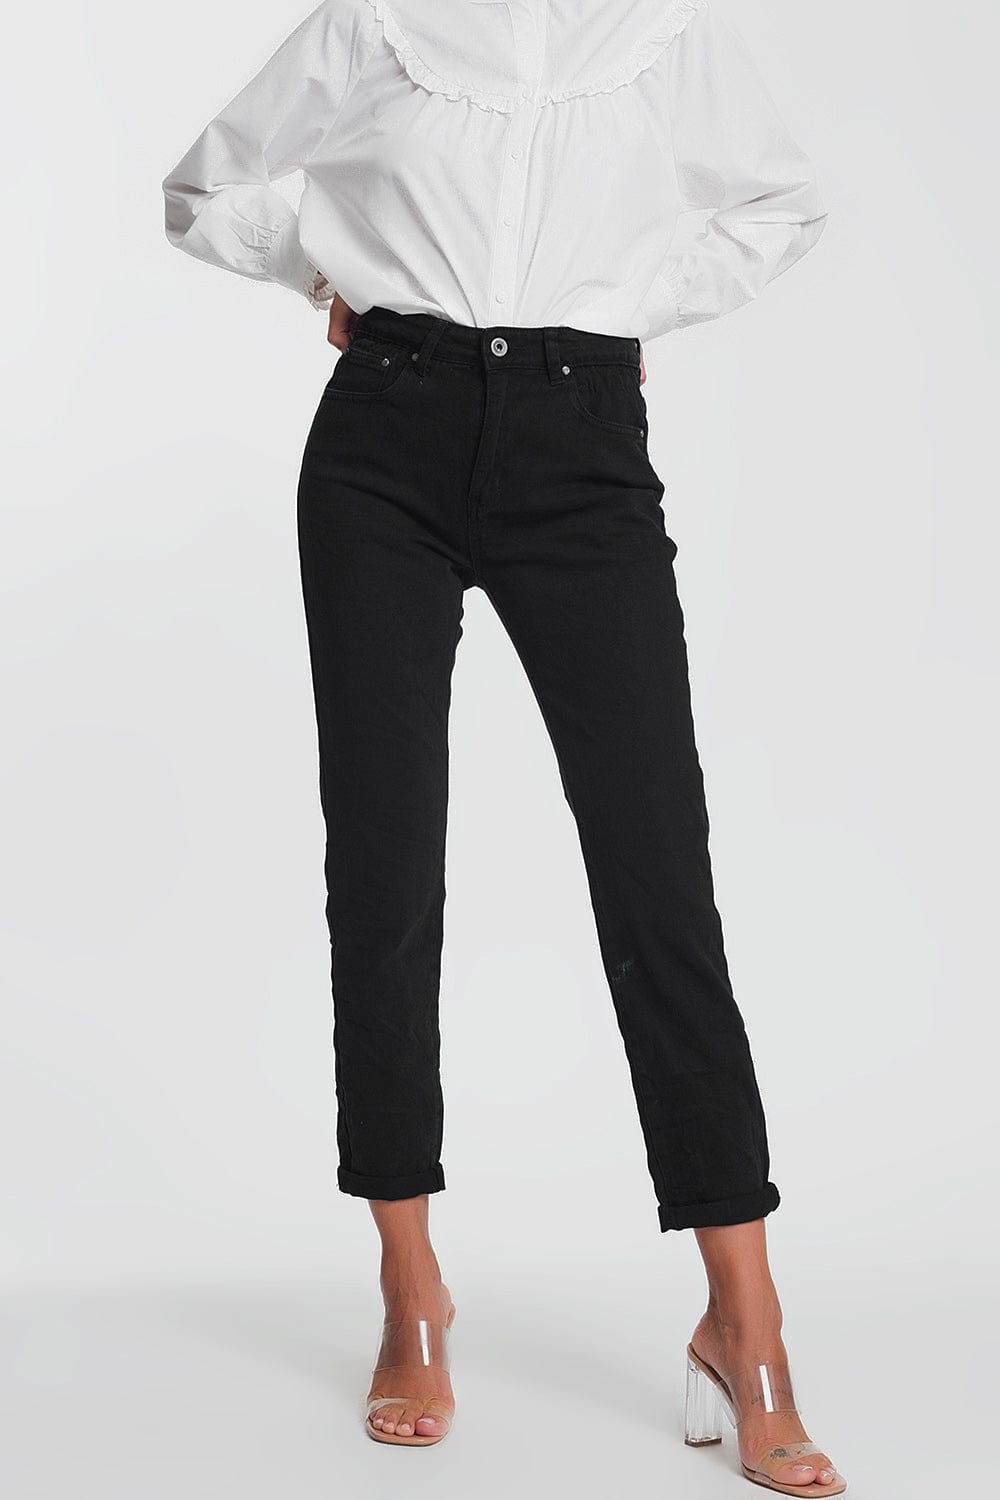 Q2 Women's Pants & Trousers Straight Leg High Waisted Jeans in Black